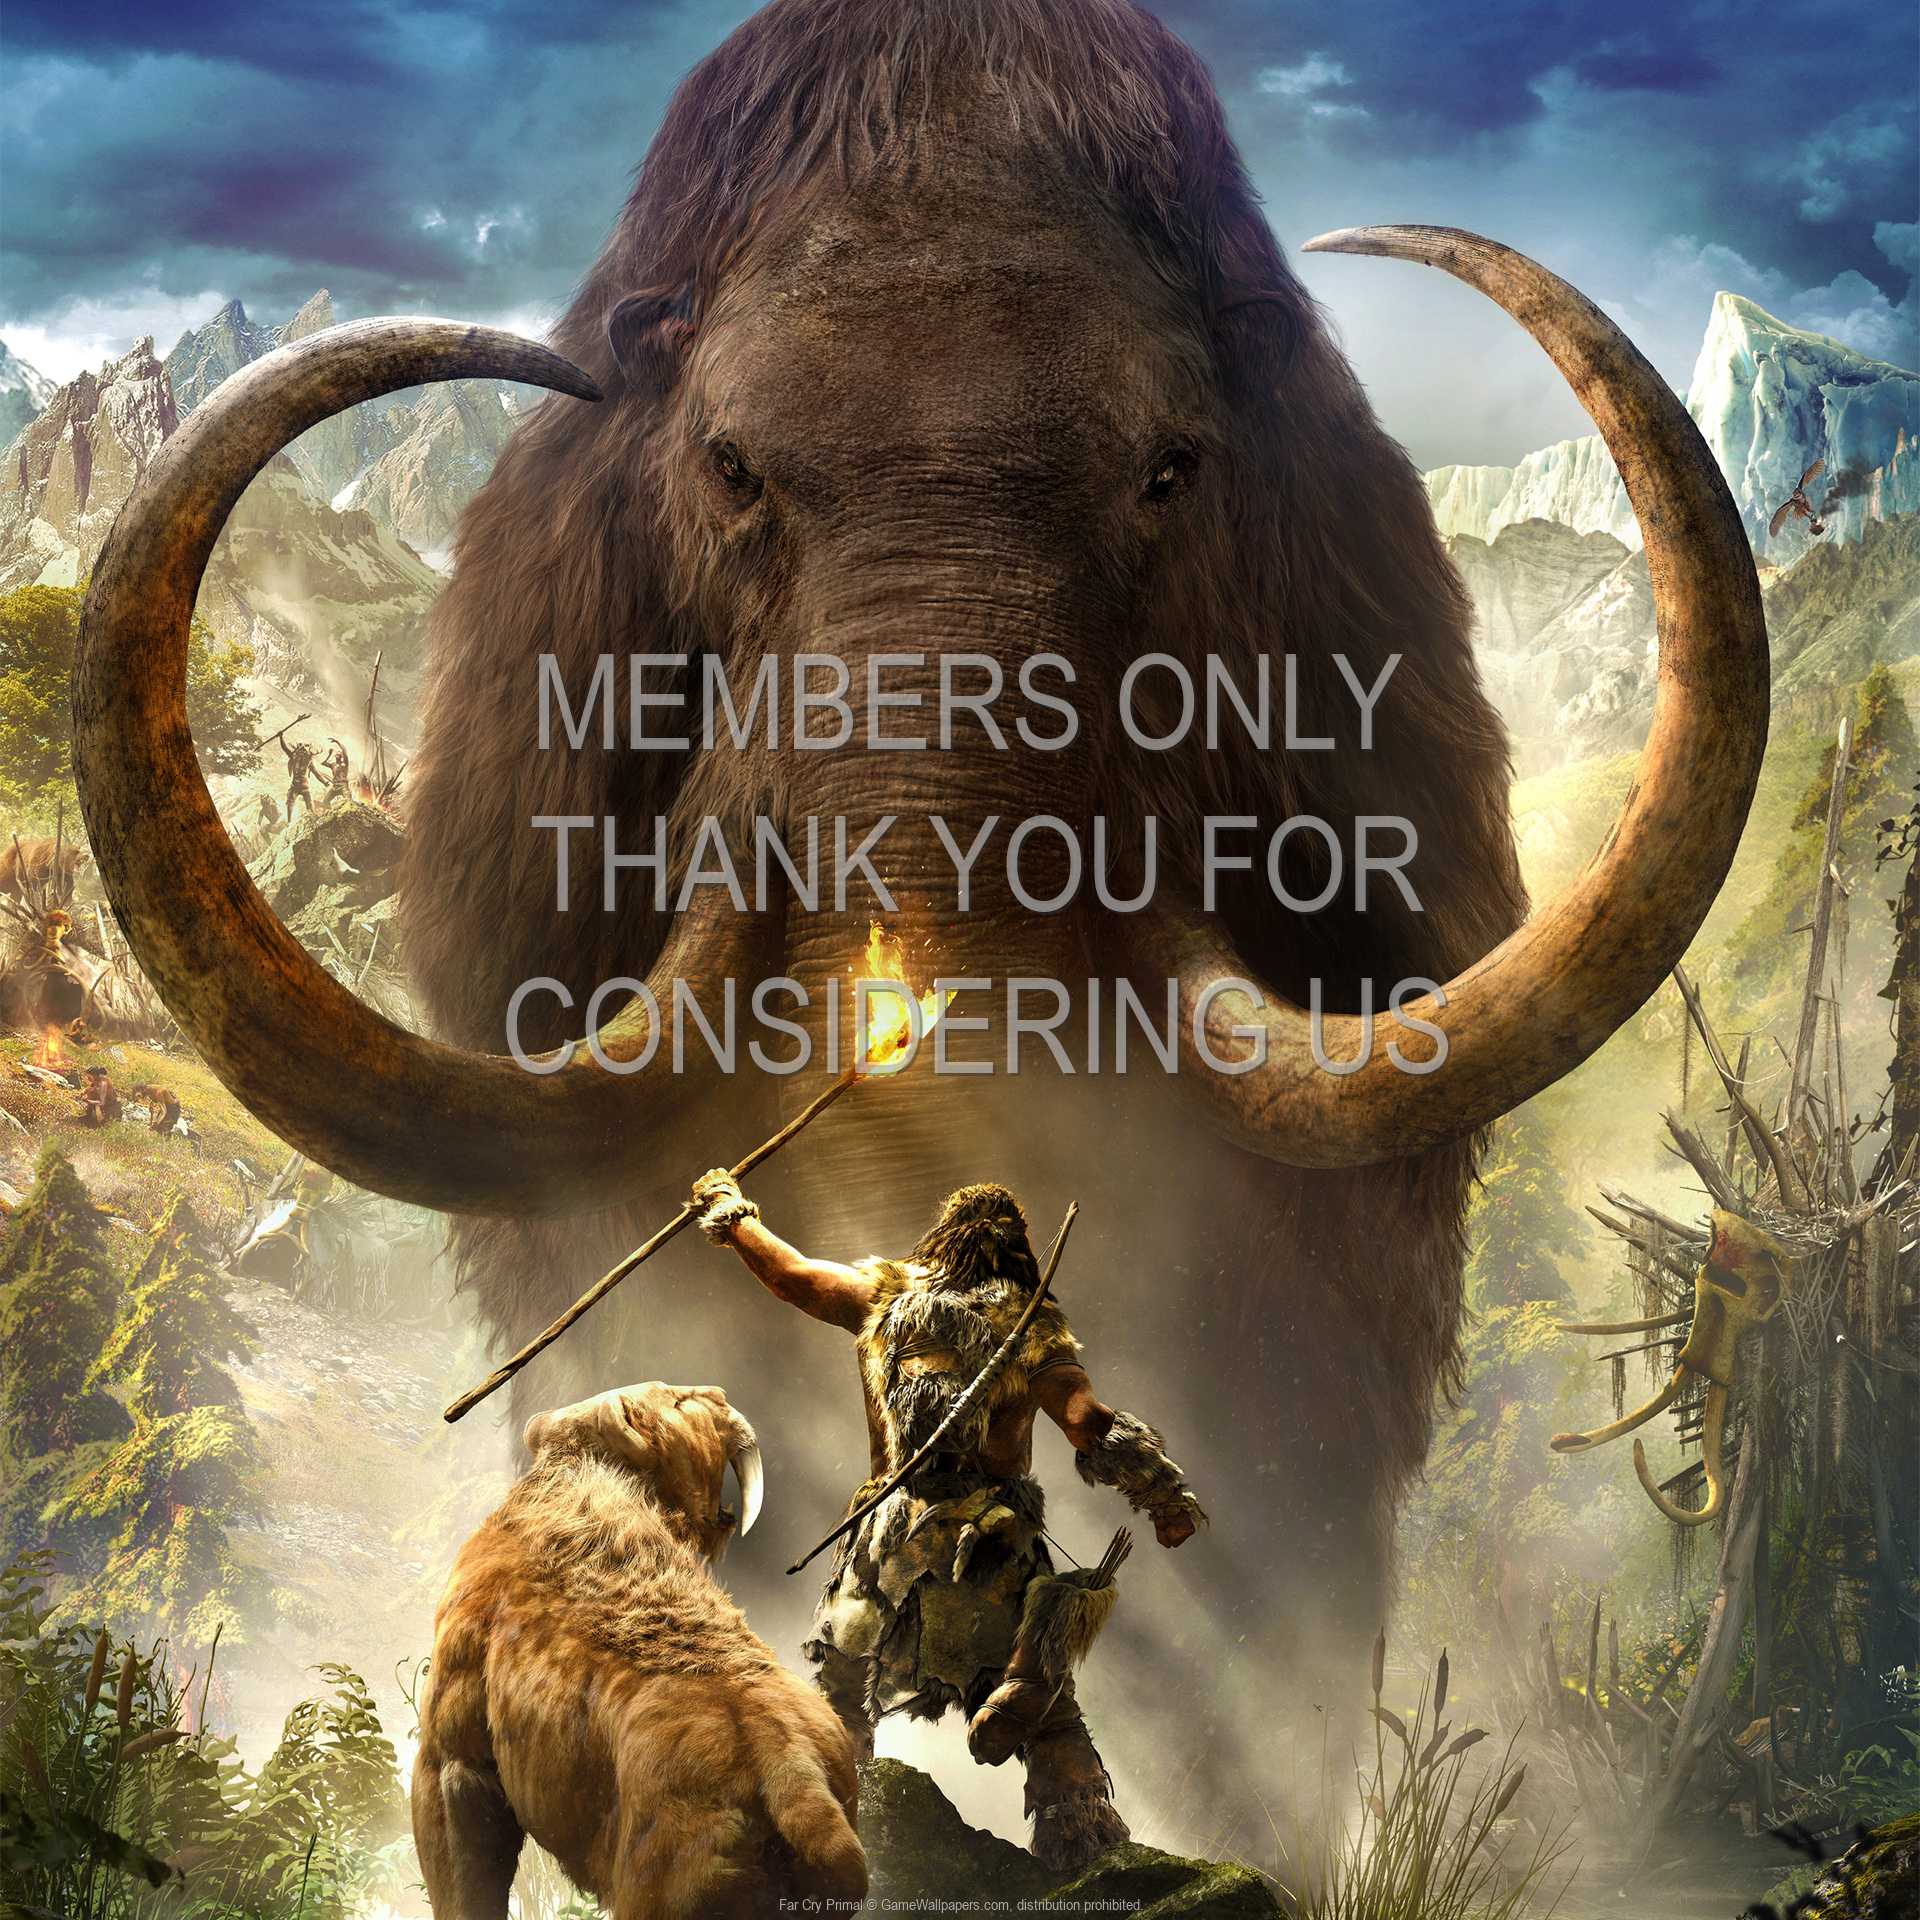 Far Cry Primal 1080p%20Horizontal Mobile wallpaper or background 02